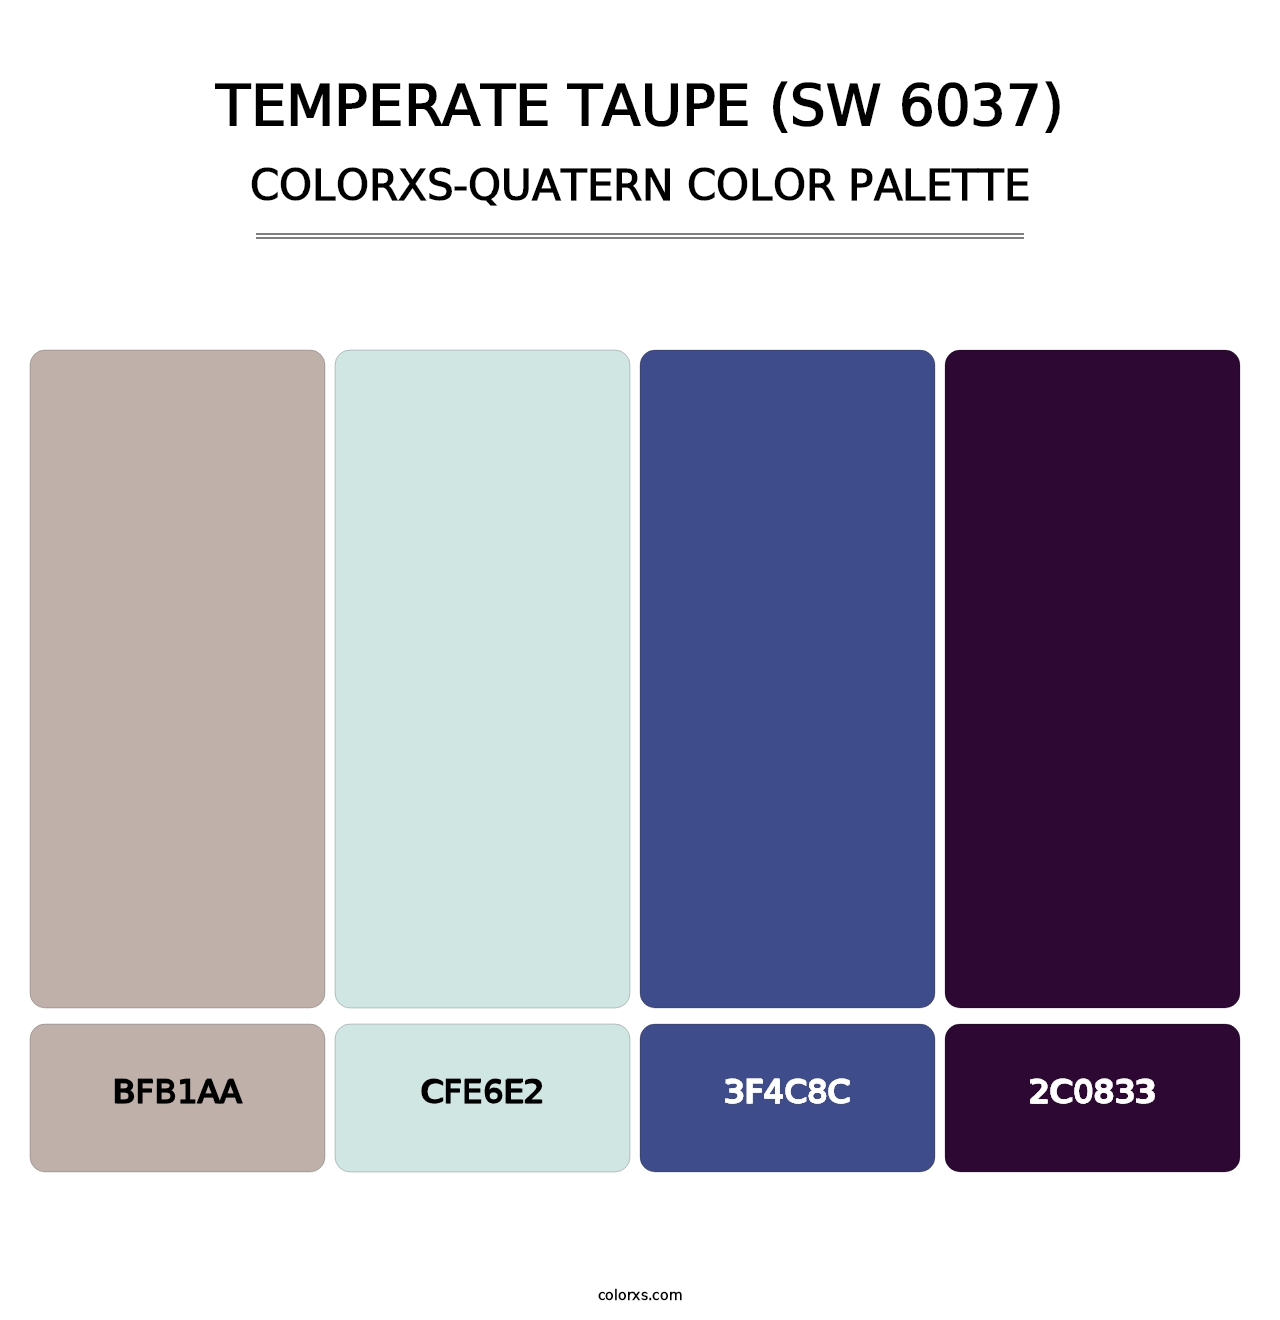 Temperate Taupe (SW 6037) - Colorxs Quatern Palette